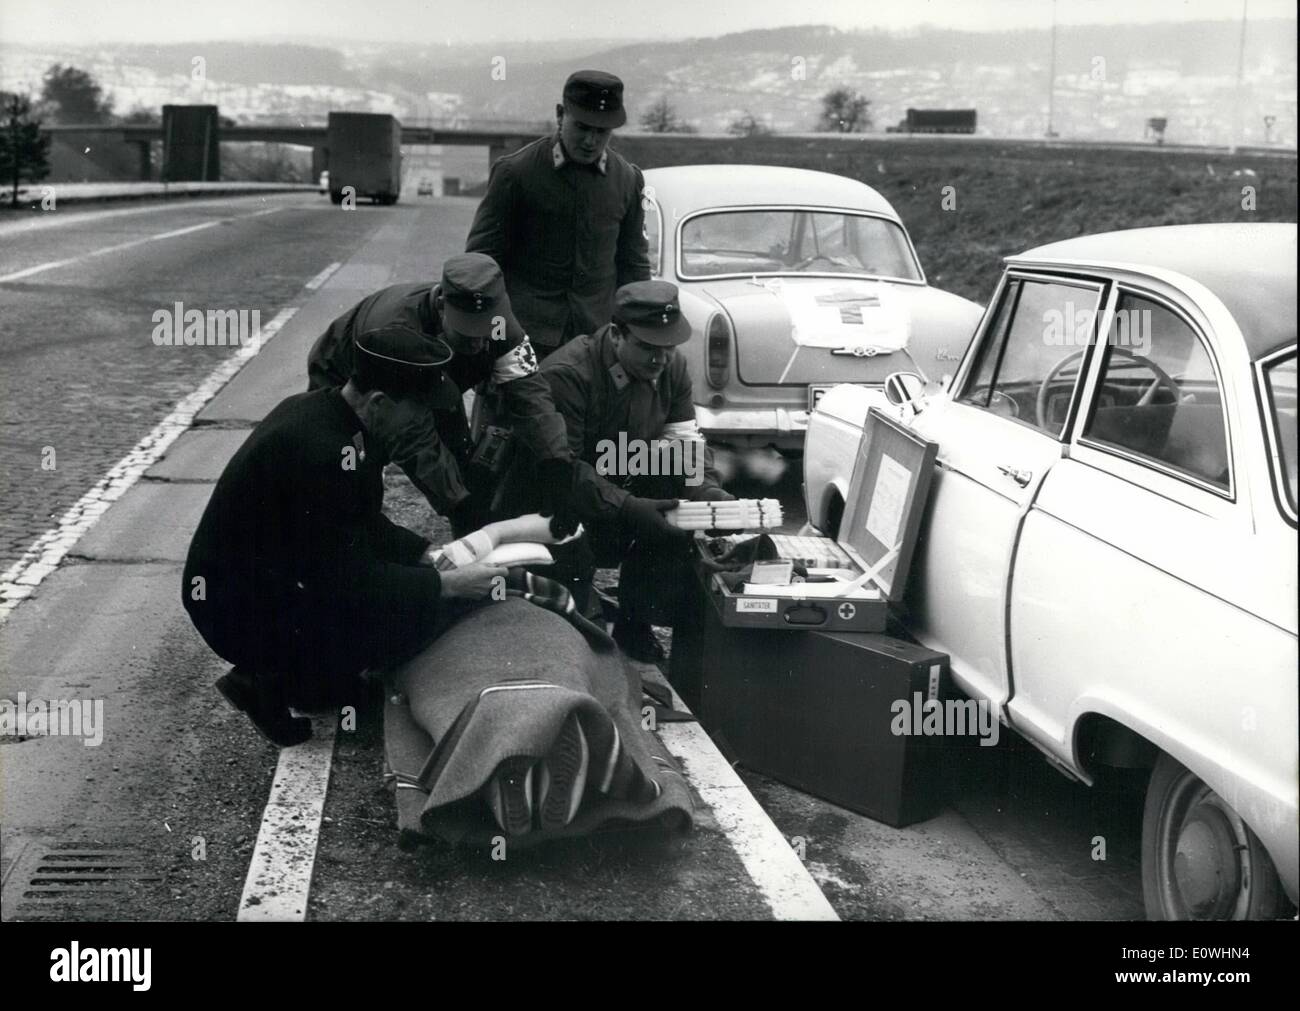 Jan. 01, 1963 - Spontaneous and gratis; the Red Cross helpers of the Pforzheim DRK (=German Red Cross) in future will make a Sunday service on the express motor road. By their private cars, which are signed by a red cross on the bonnst and also on the after deck, they are waiting in a petrol station on the express motor road at the risky steep part of the road in Pforzheim, to can help immediately when it is necessary. On the last weekend the first initiative took place. The private cars are equipped by the modernst medical remedies Stock Photo